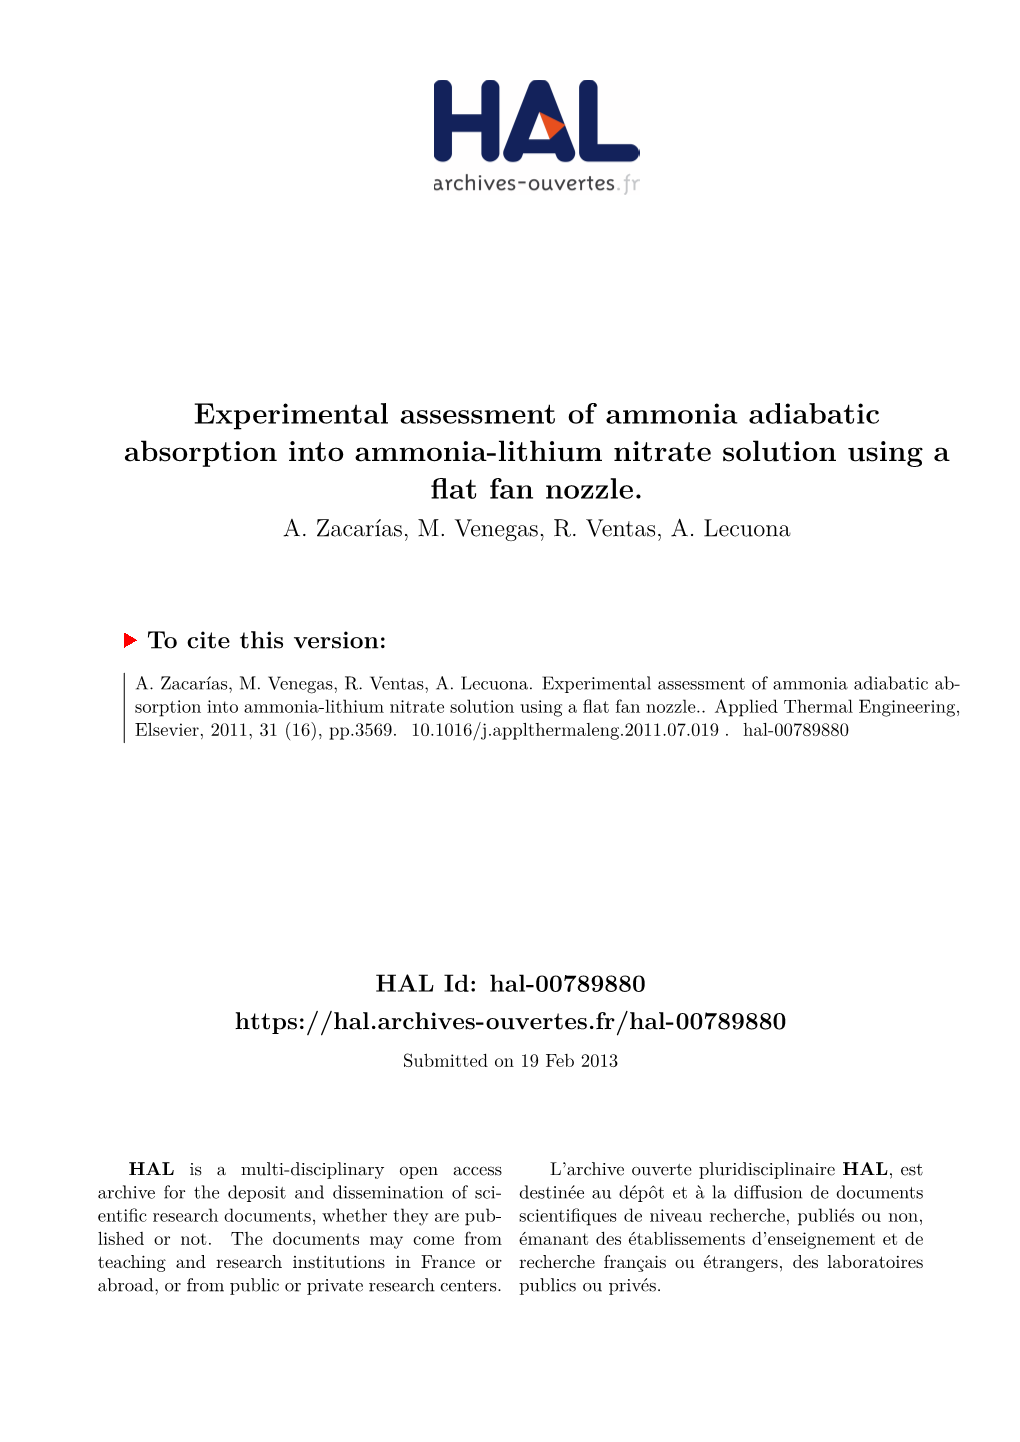 Experimental Assessment of Ammonia Adiabatic Absorption Into Ammonia-Lithium Nitrate Solution Using a Flat Fan Nozzle